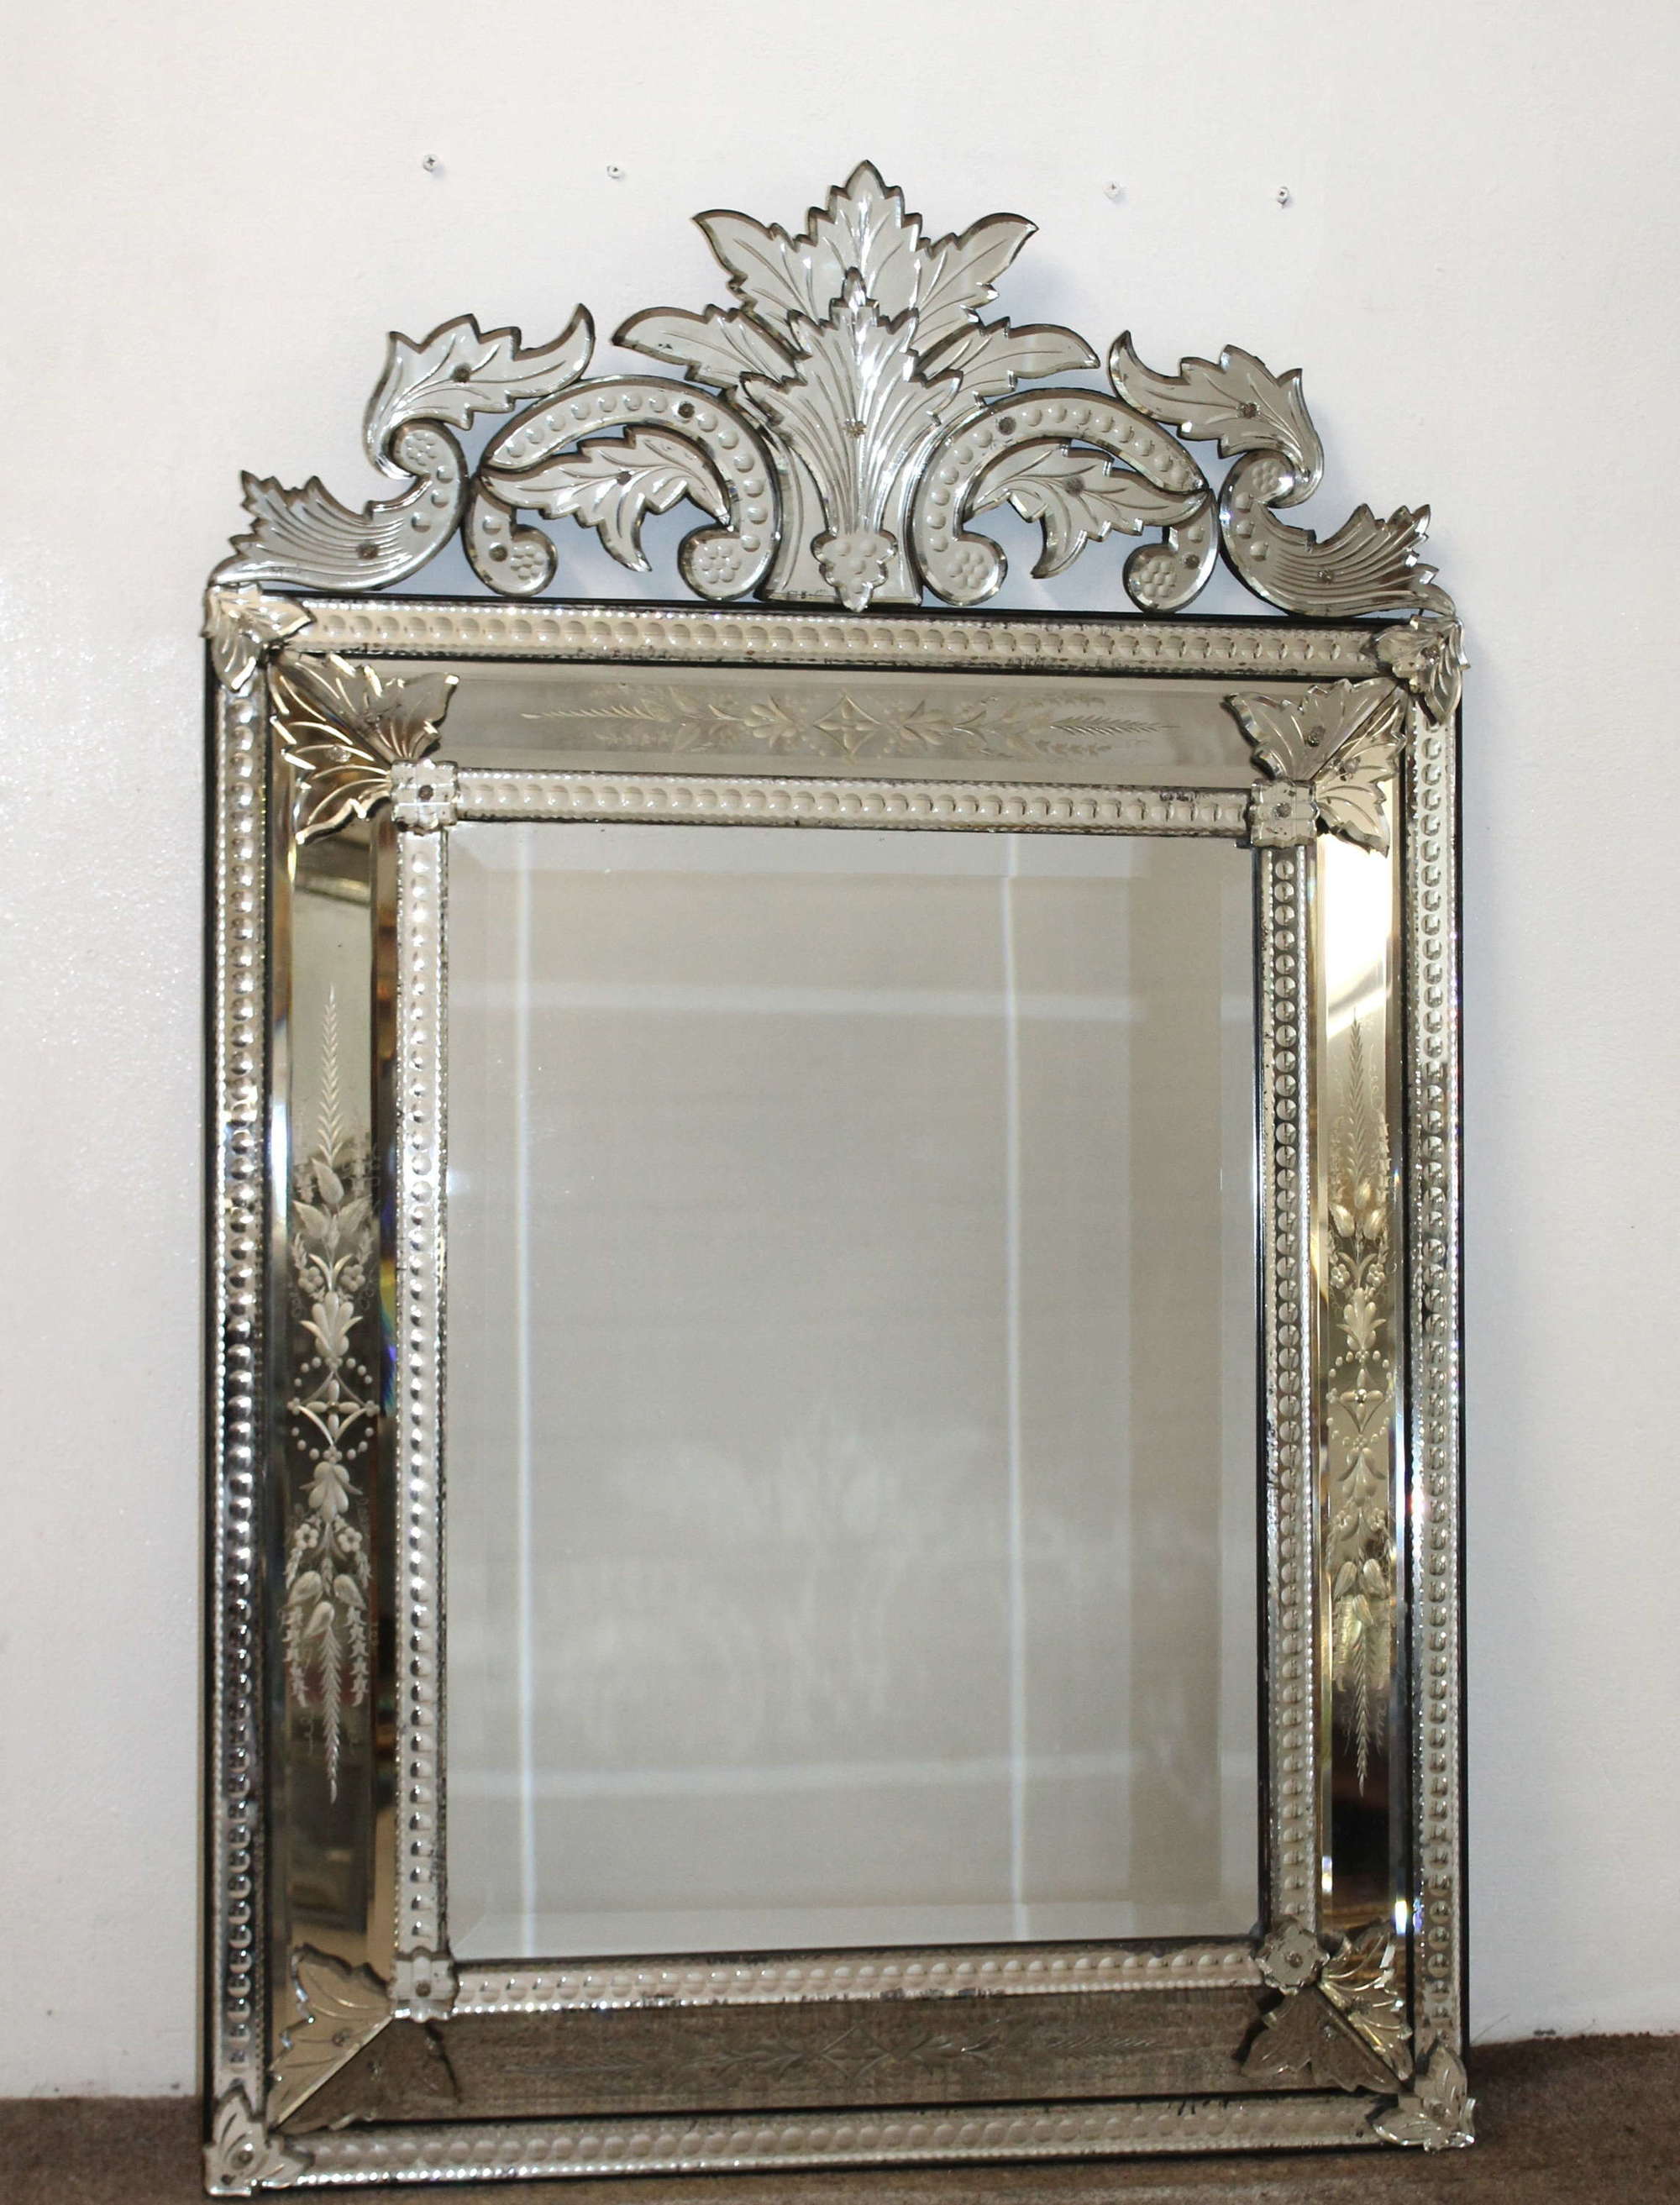 Antique cushioned Venetian mirror with acanthus cartouche